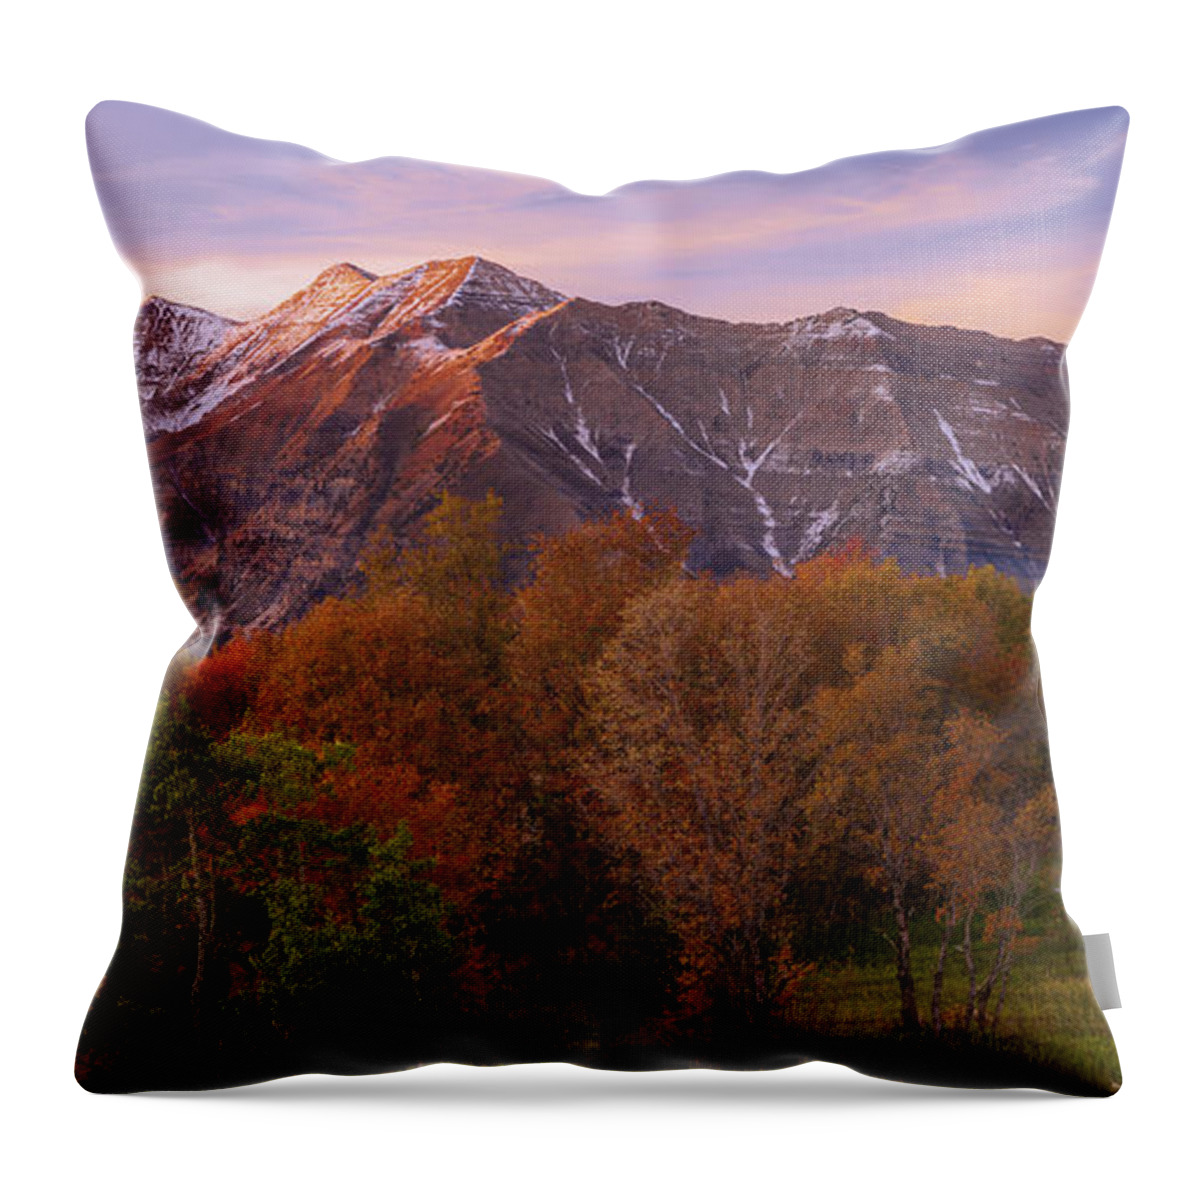 Hint Of Fall Throw Pillow featuring the photograph Hint of Fall by Chad Dutson